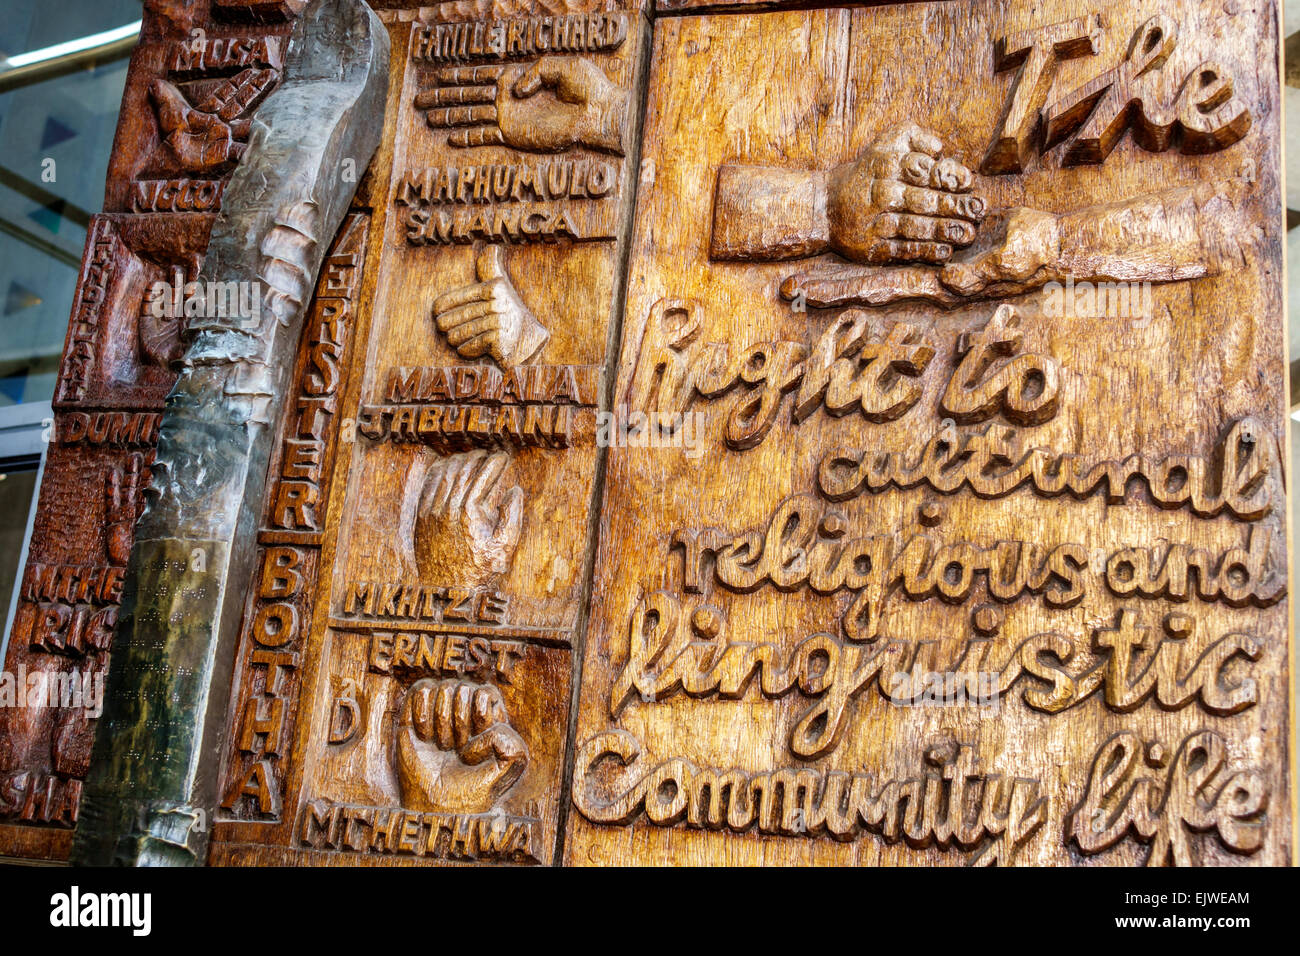 Johannesburg South Africa,Braamfontein,Constitution Hill Museum,Constitutional Court building,entrance doors,handle,timber,wood,carving,Bill of Rights Stock Photo